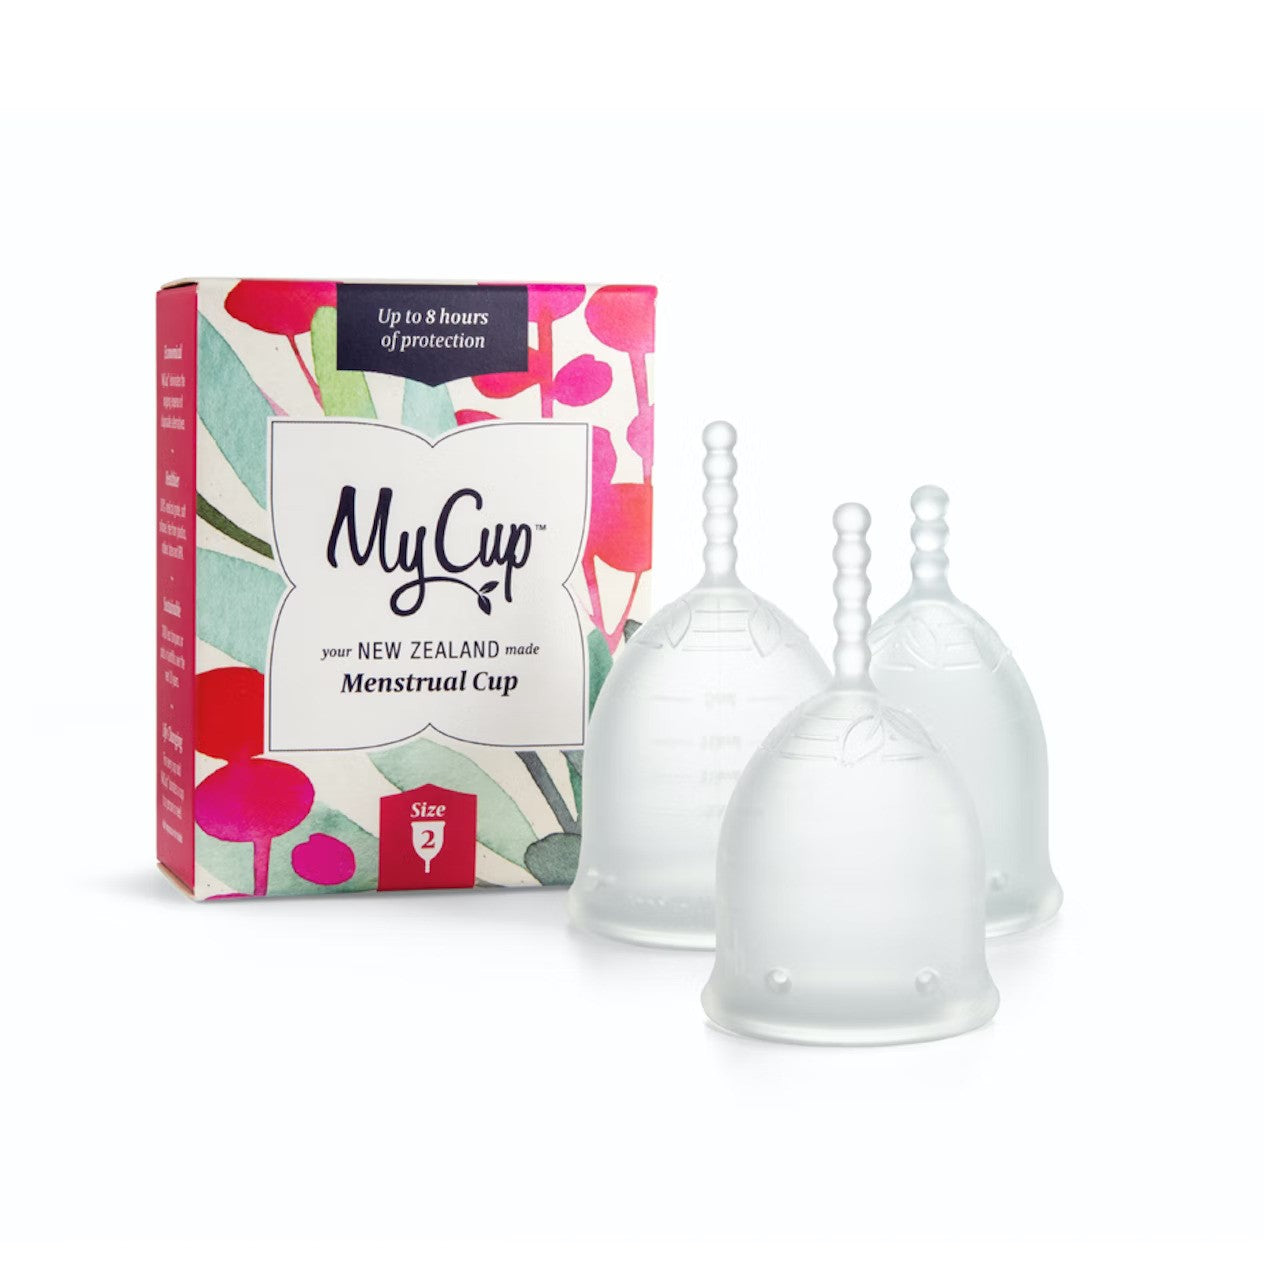 Image with 3 My Cup Menstrual cups with packaging